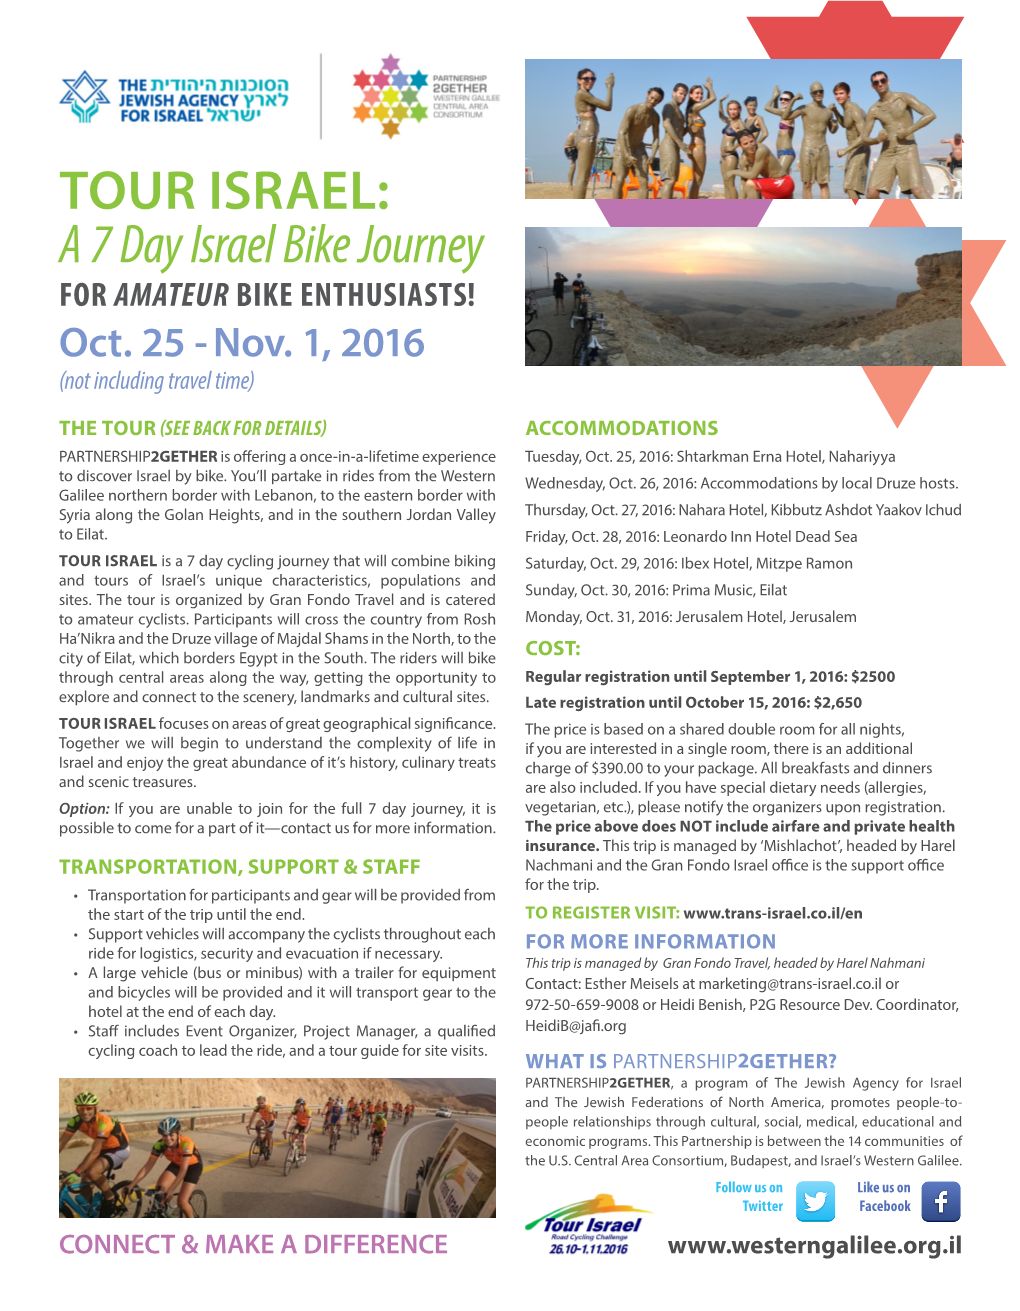 TOUR ISRAEL: a 7 Day Israel Bike Journey for AMATEUR BIKE ENTHUSIASTS! Oct